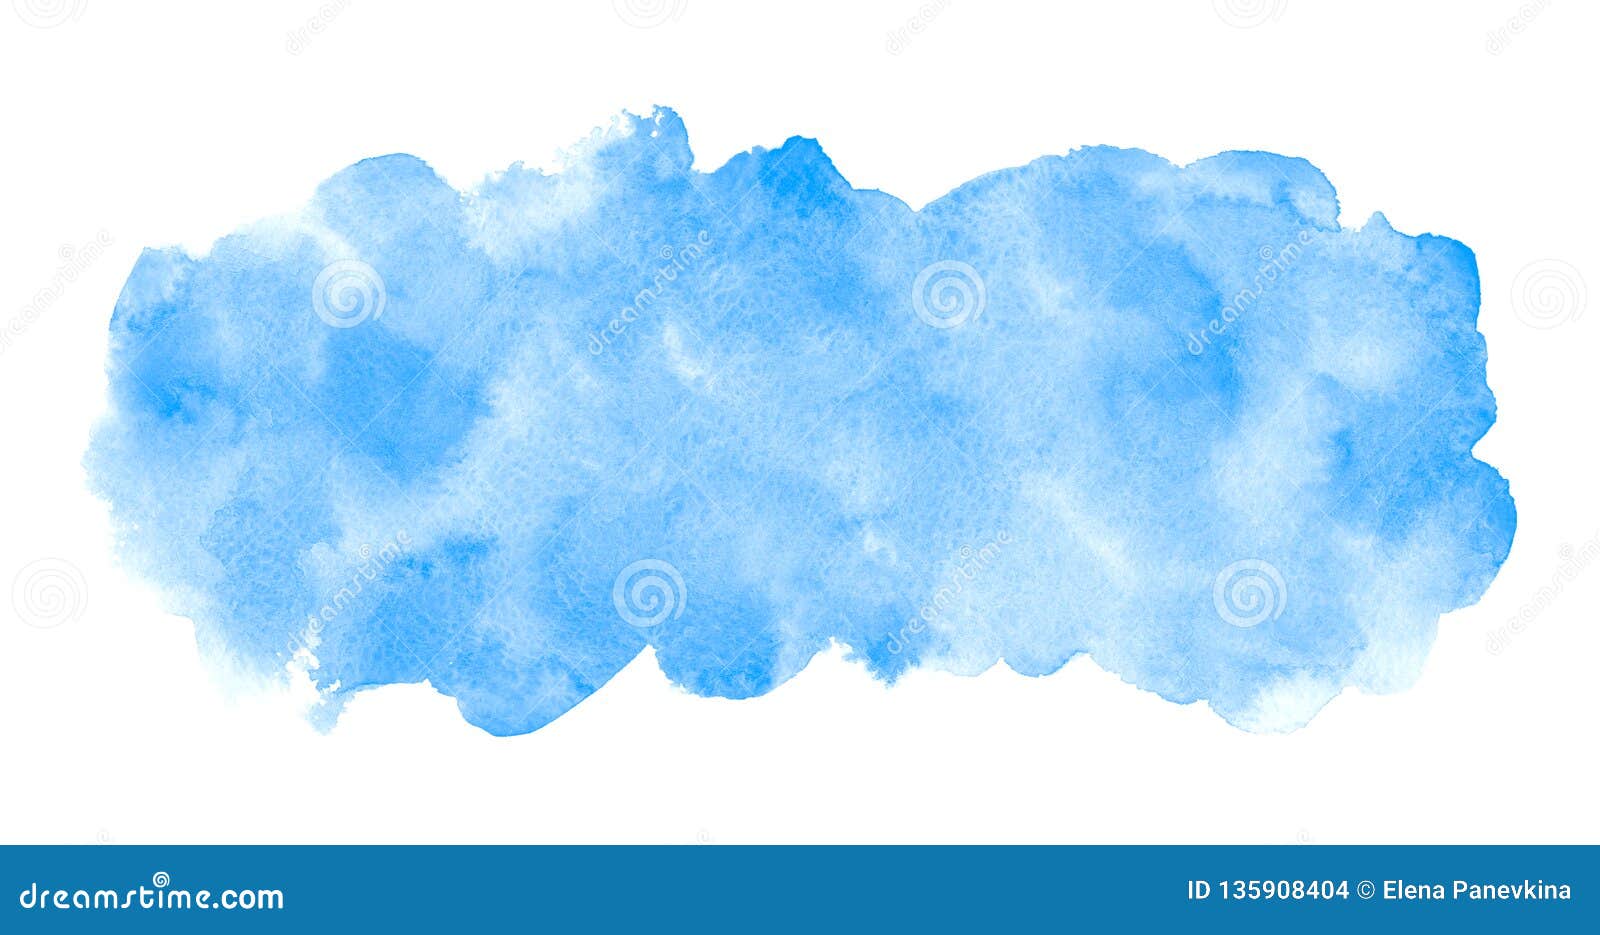 blue watercolor rectangle elongated background with stains